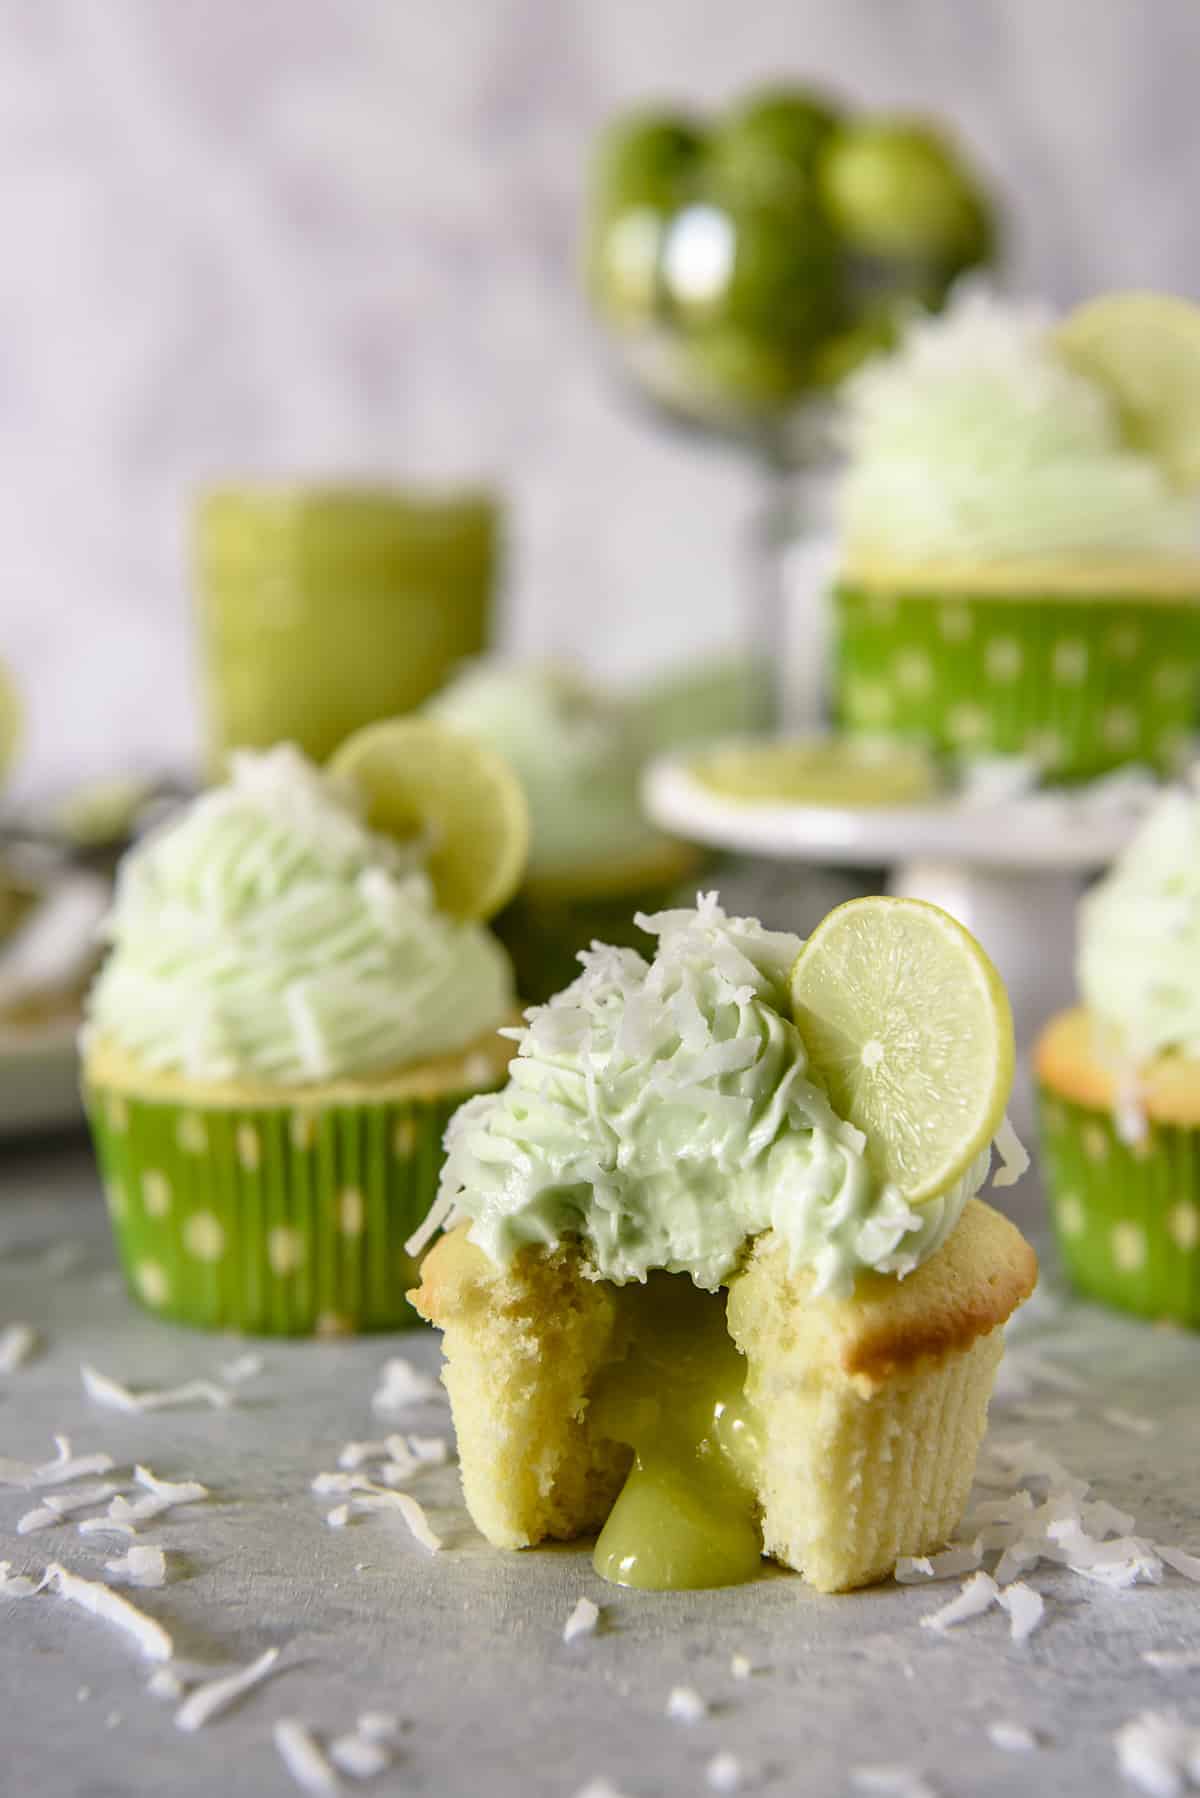 Coconut Lime Cupcakes with Key Lime Curd Filling • The Crumby Kitchen